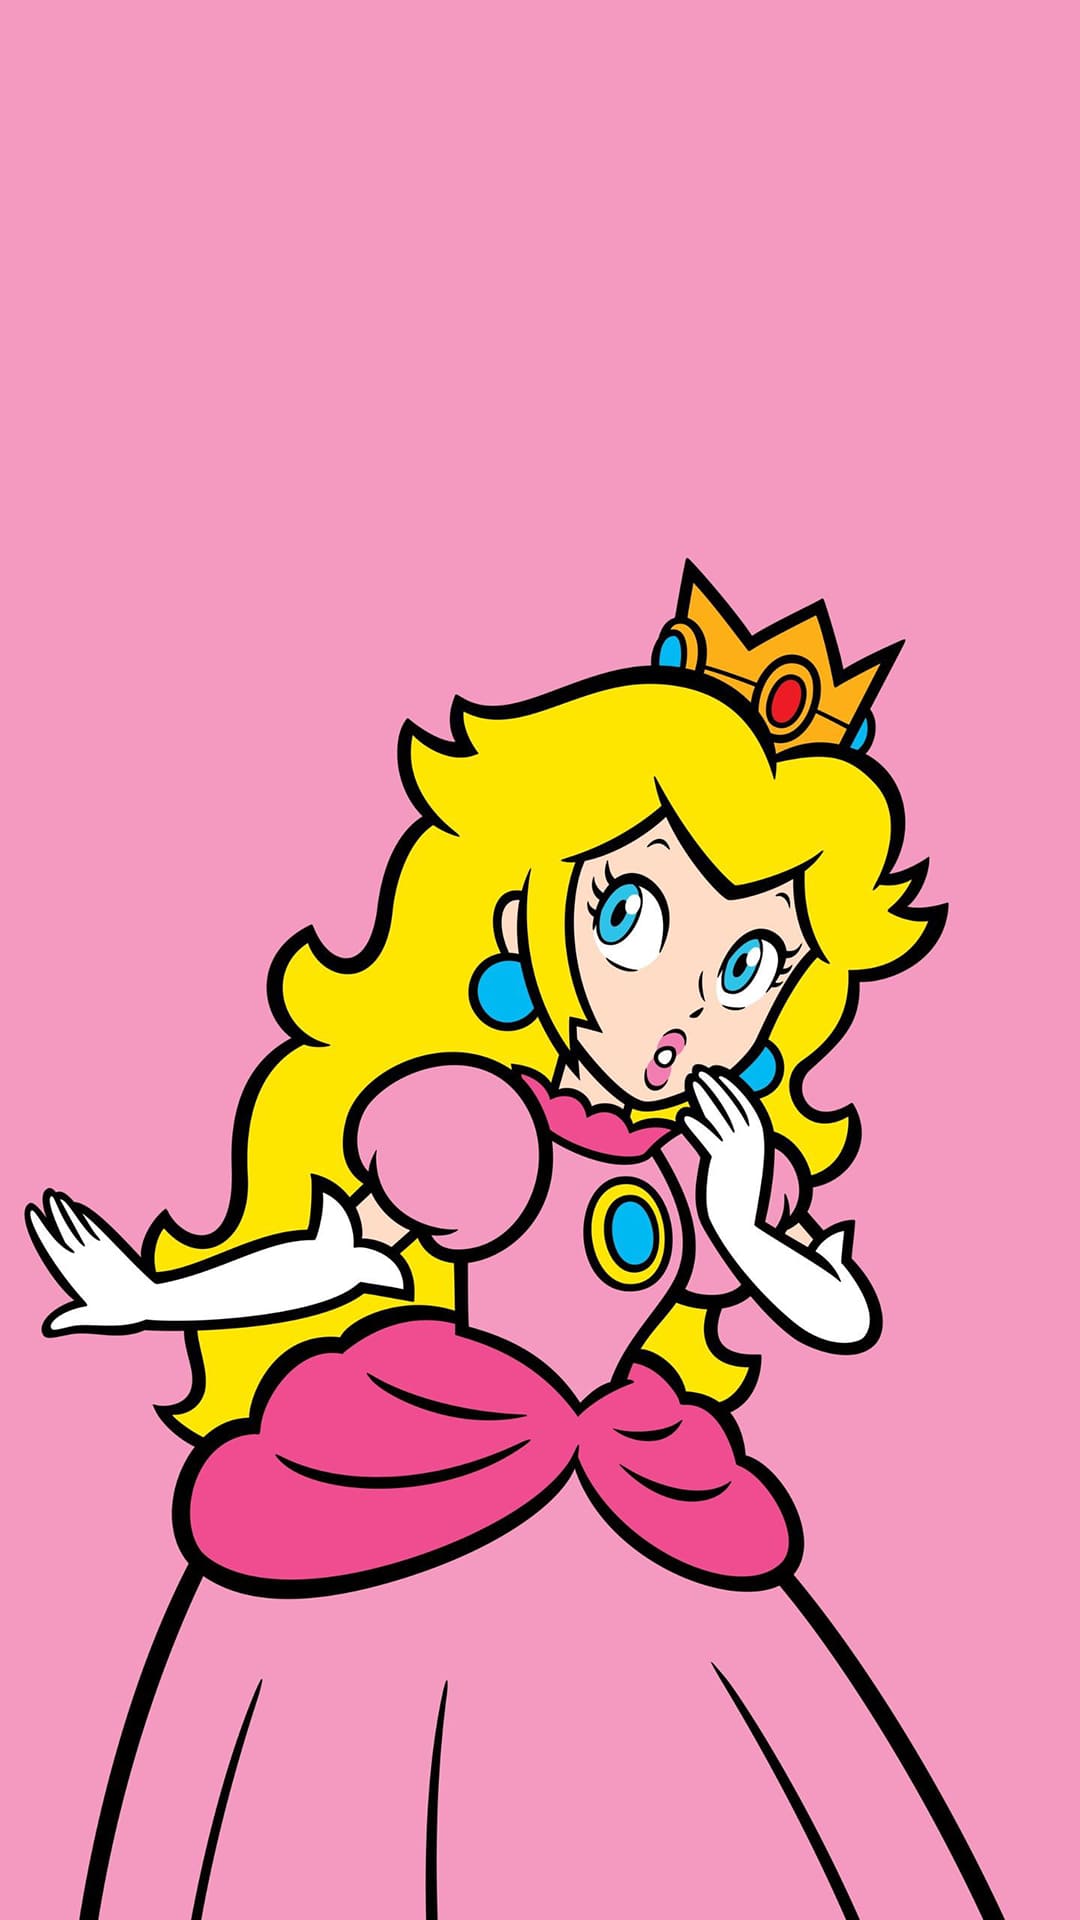 The princess peach is wearing a pink dress and has her hand on one side - Princess Peach